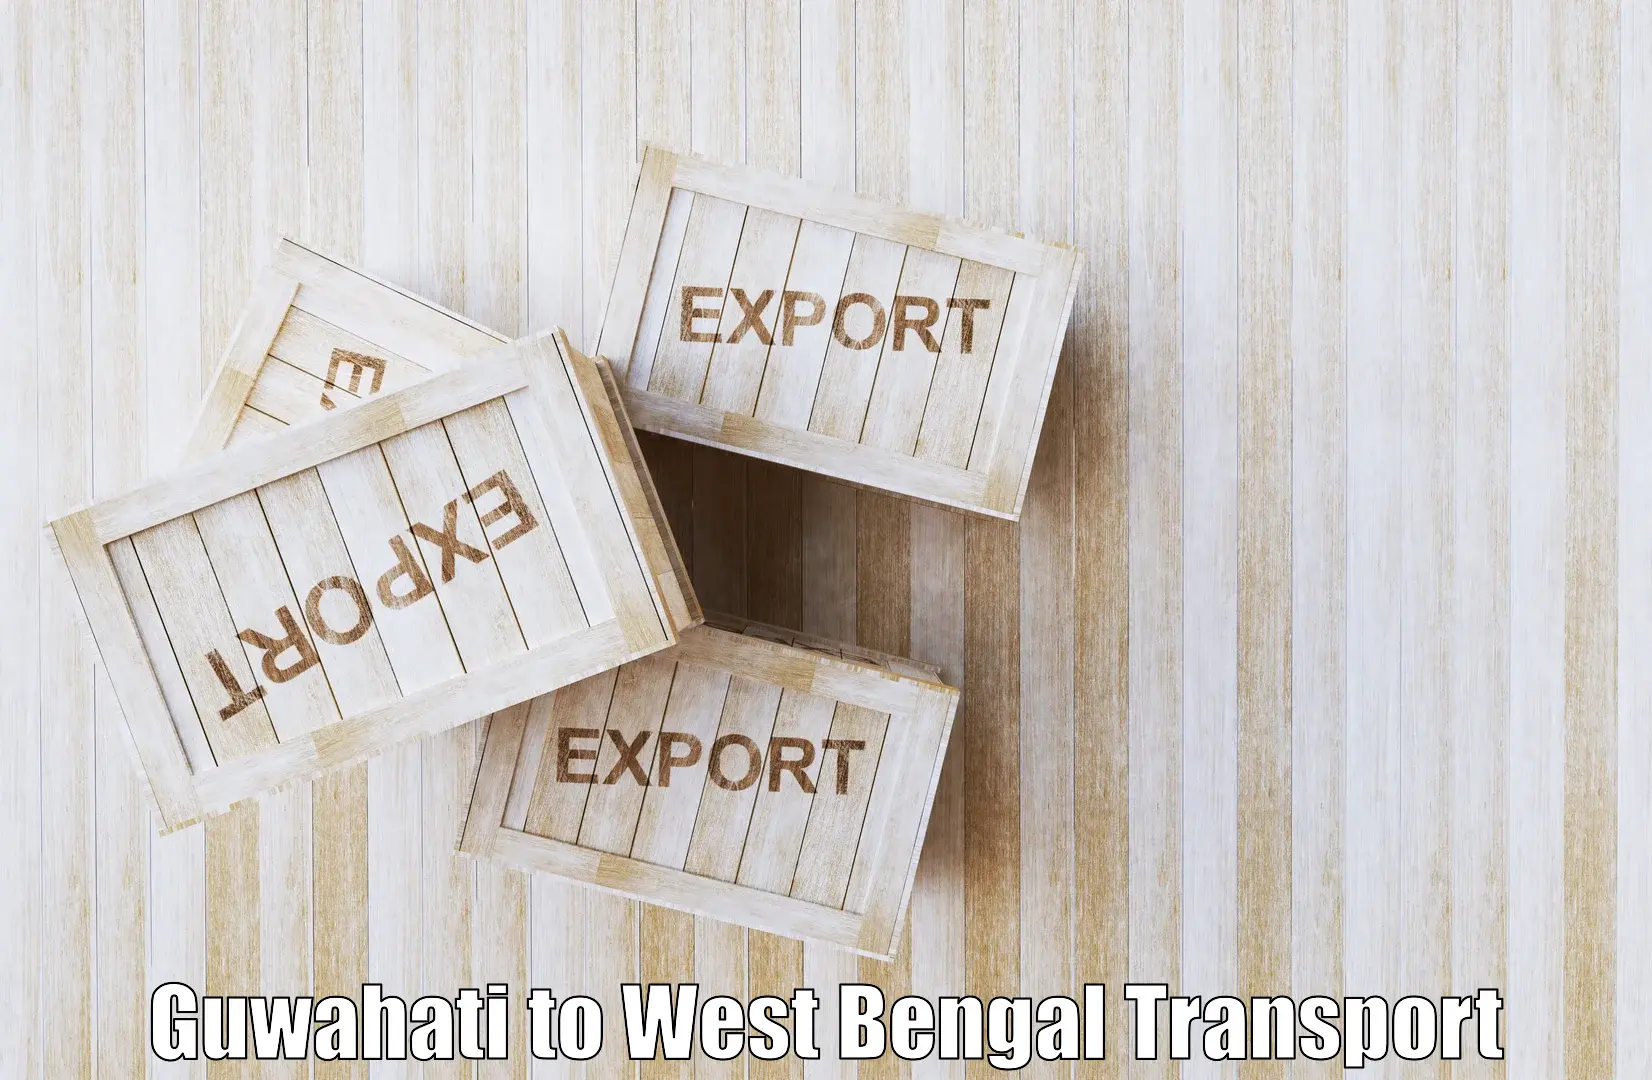 Best transport services in India Guwahati to Park Street